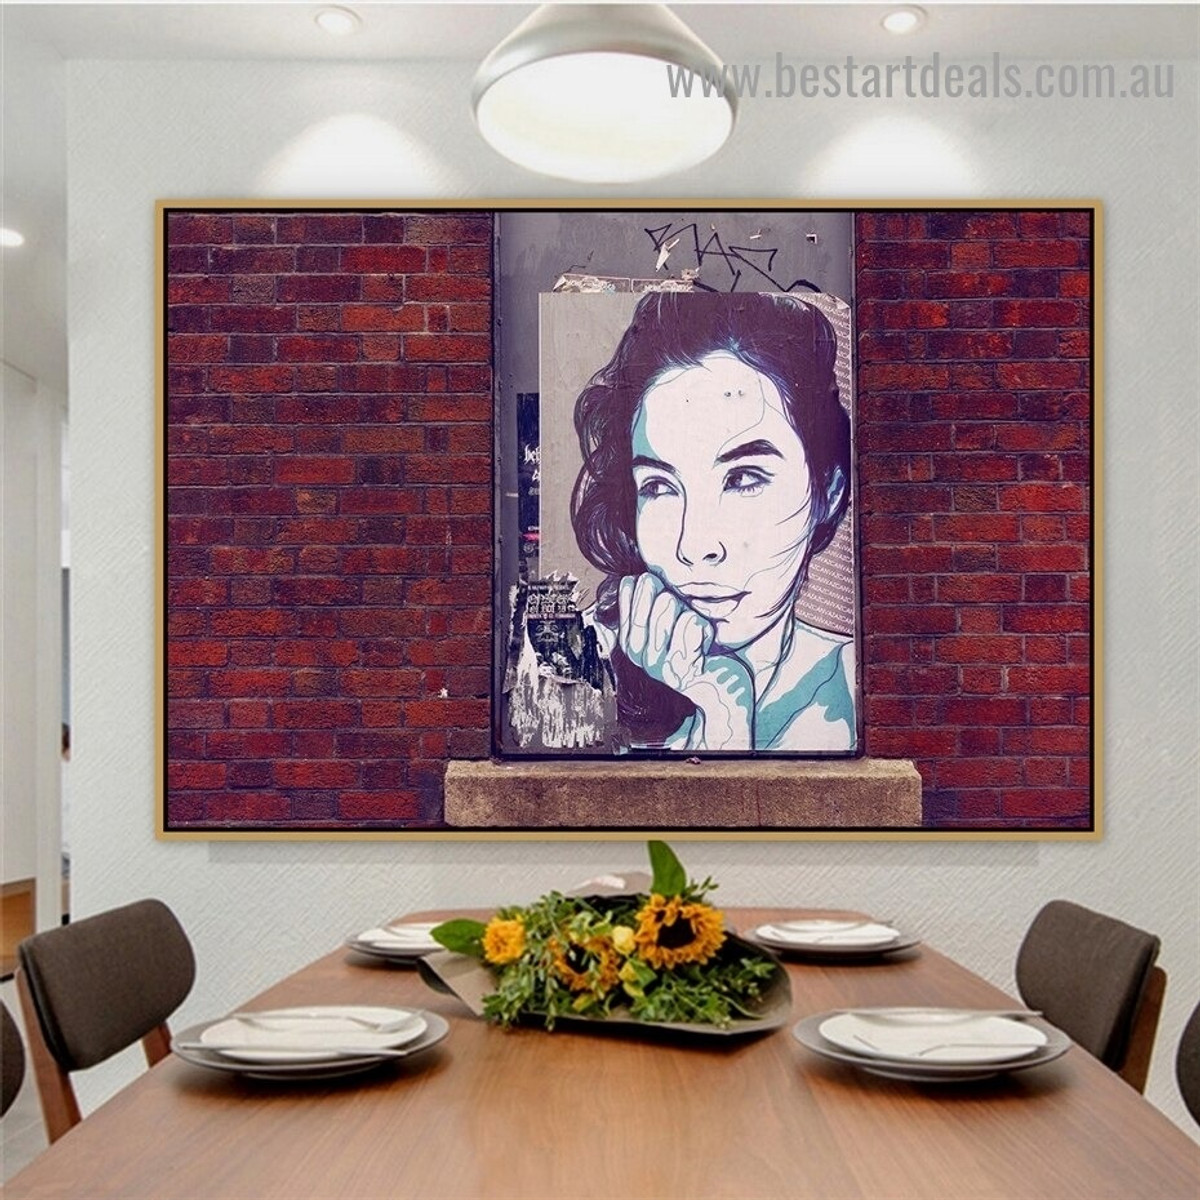 Faded Girl Face Figure Graffiti Portrait Image Canvas Print for Room Wall Decoration